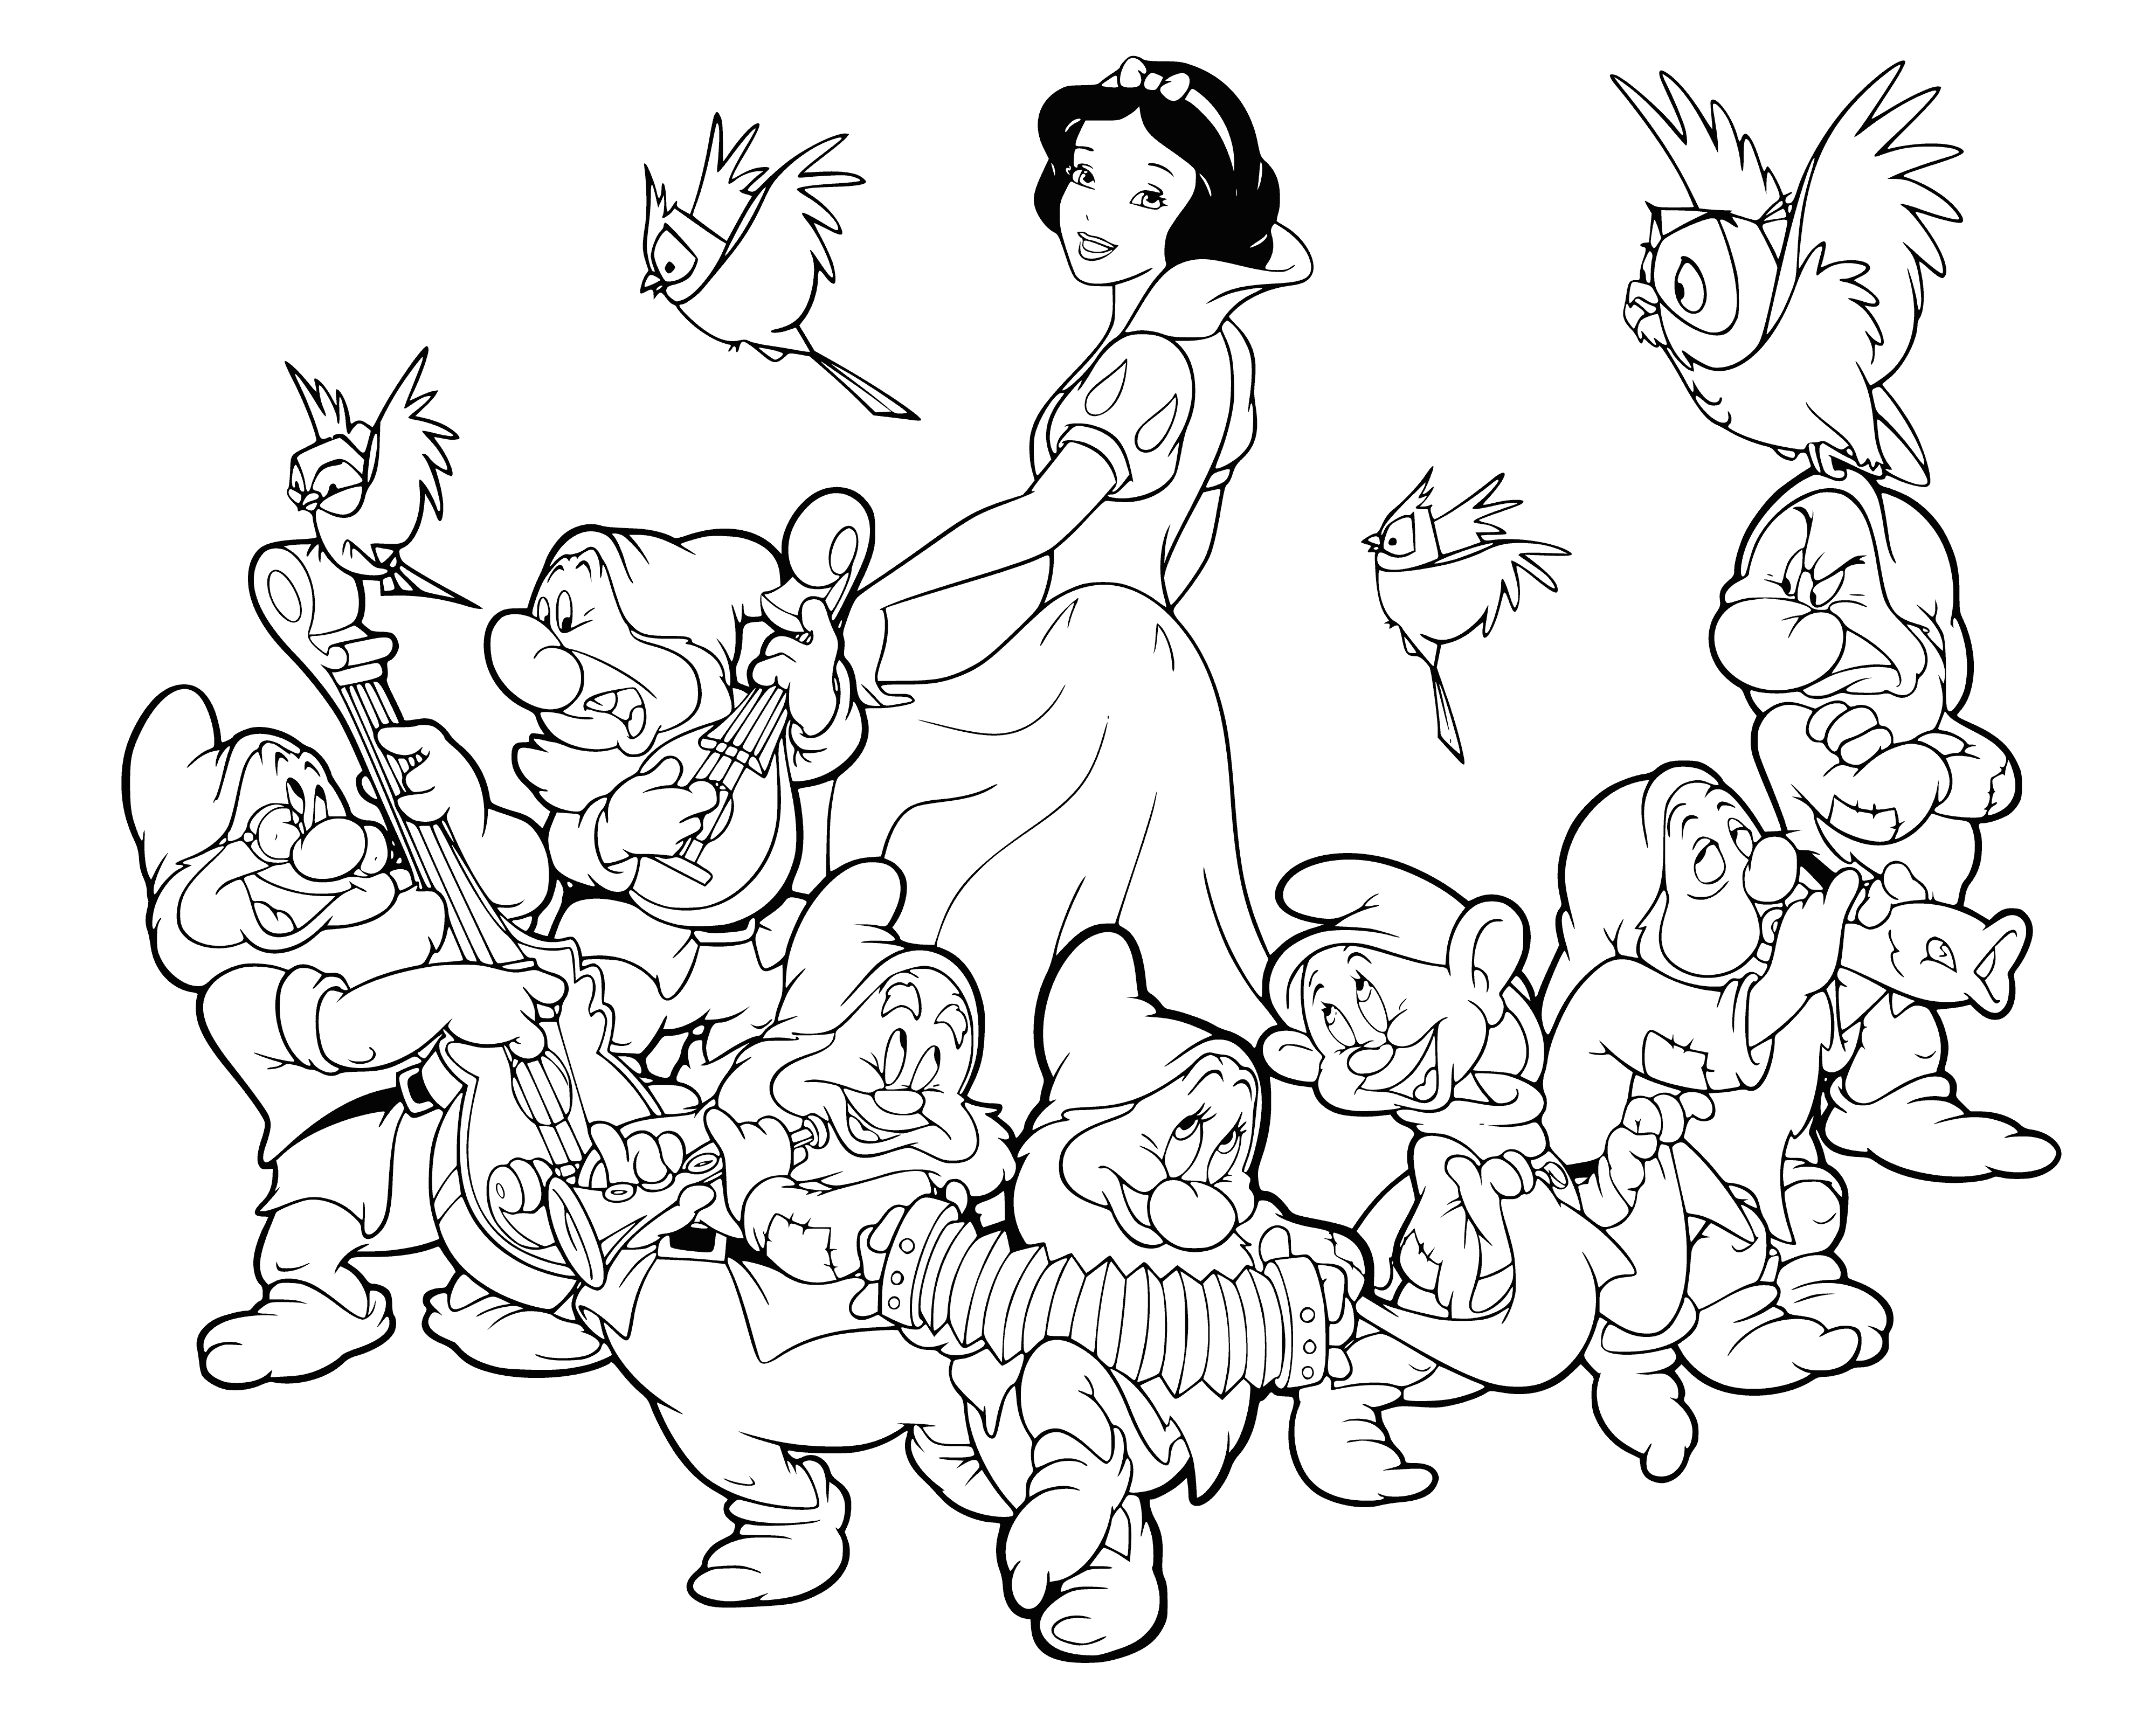 coloring page: This coloring page features Snow White, the beautiful young woman with long, dark hair and light skin, wearing a blue dress and white apron, surrounded by the seven dwarfs. The dwarfs, of different sizes and colors, appear to be mining with pickaxes in front of a dark cave, while Snow White looks happy and content.